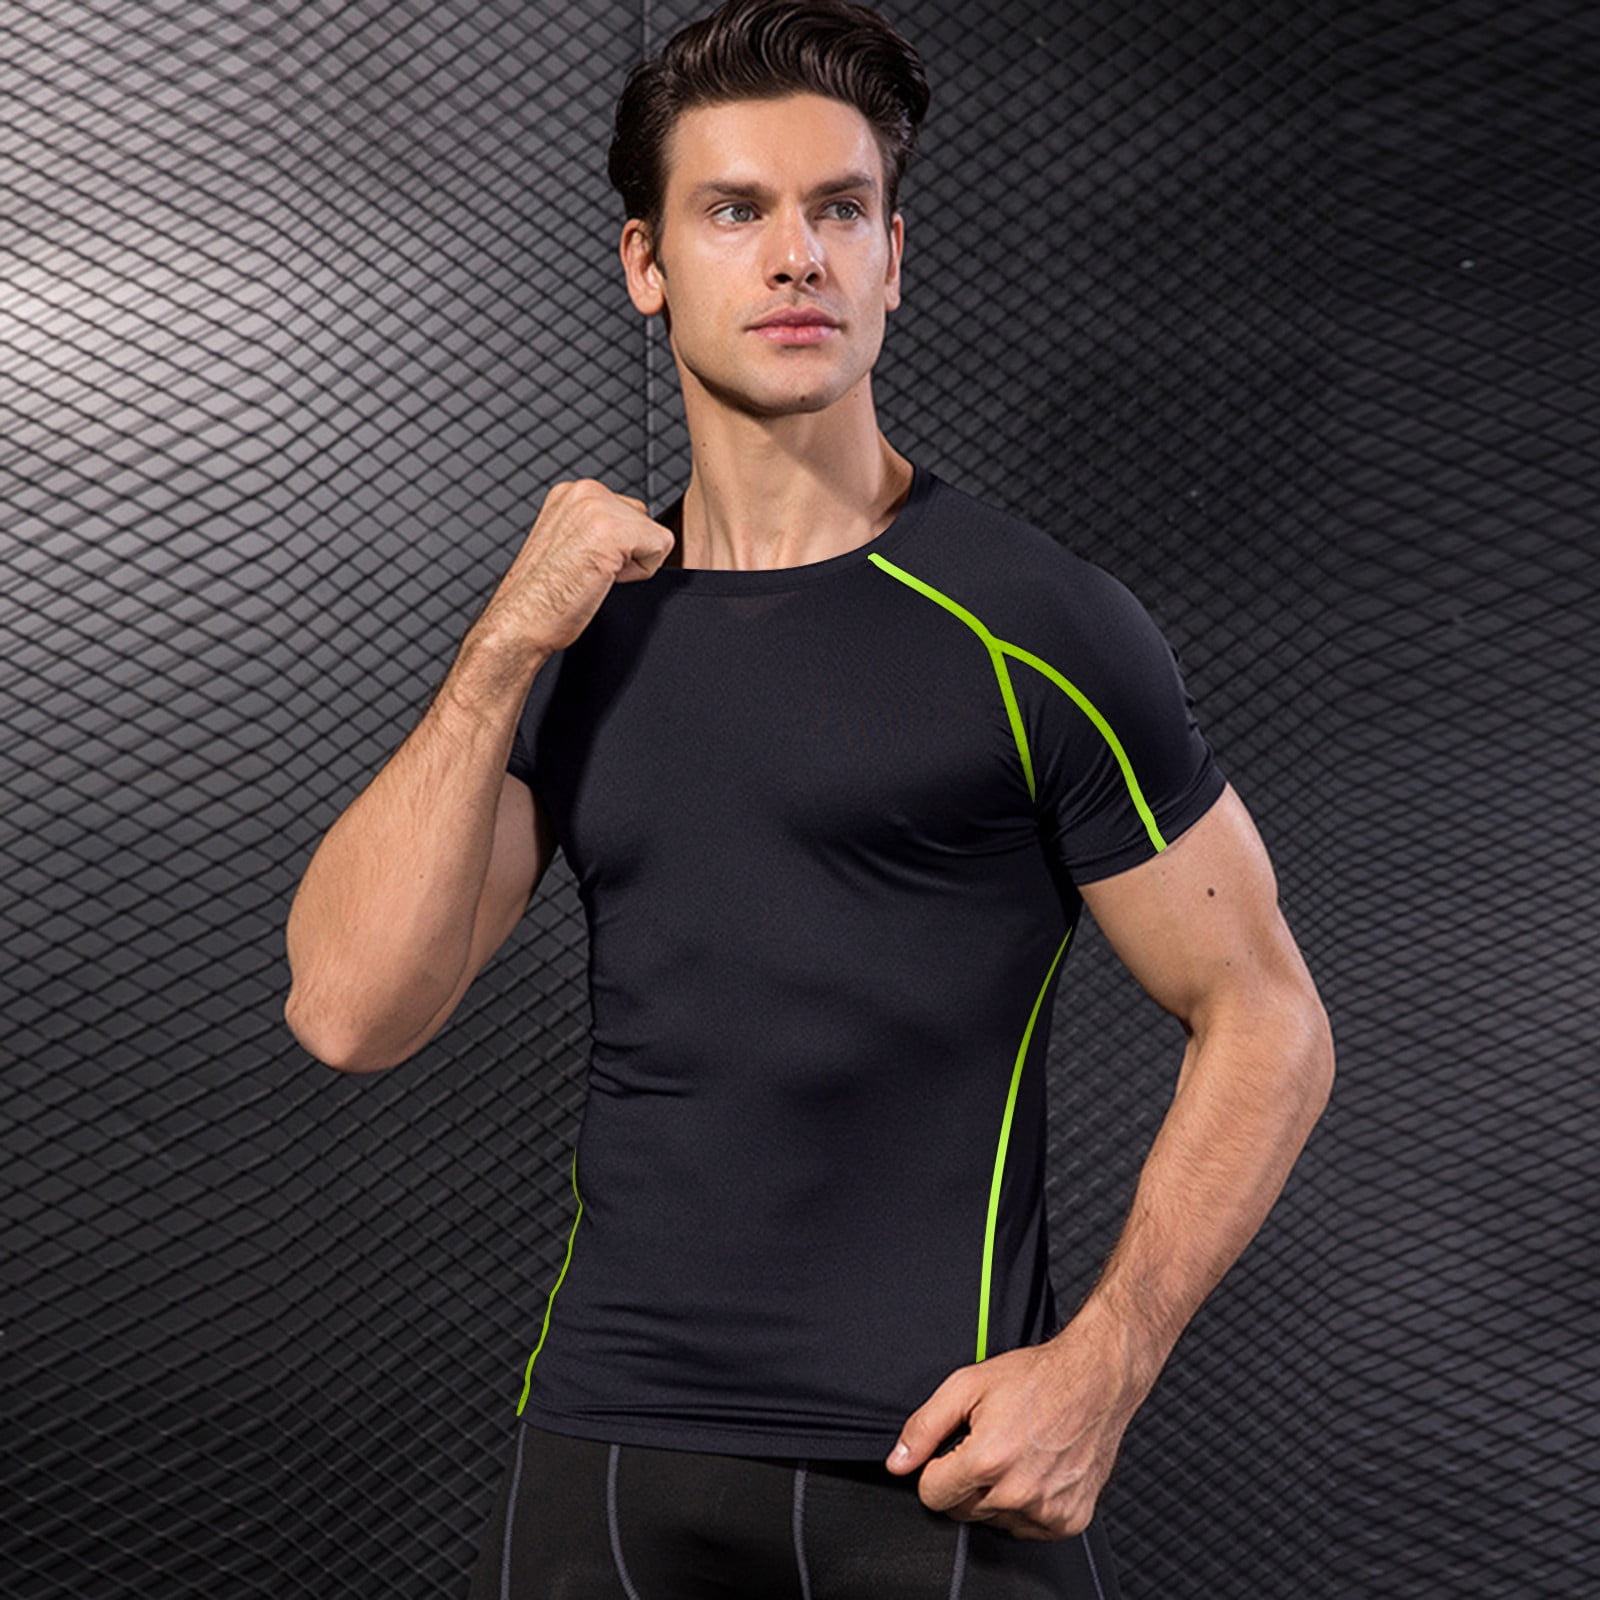 Men's Cool Dry Athletic Compression Short Sleeve Gym Baselayer Workout T-Shirts 